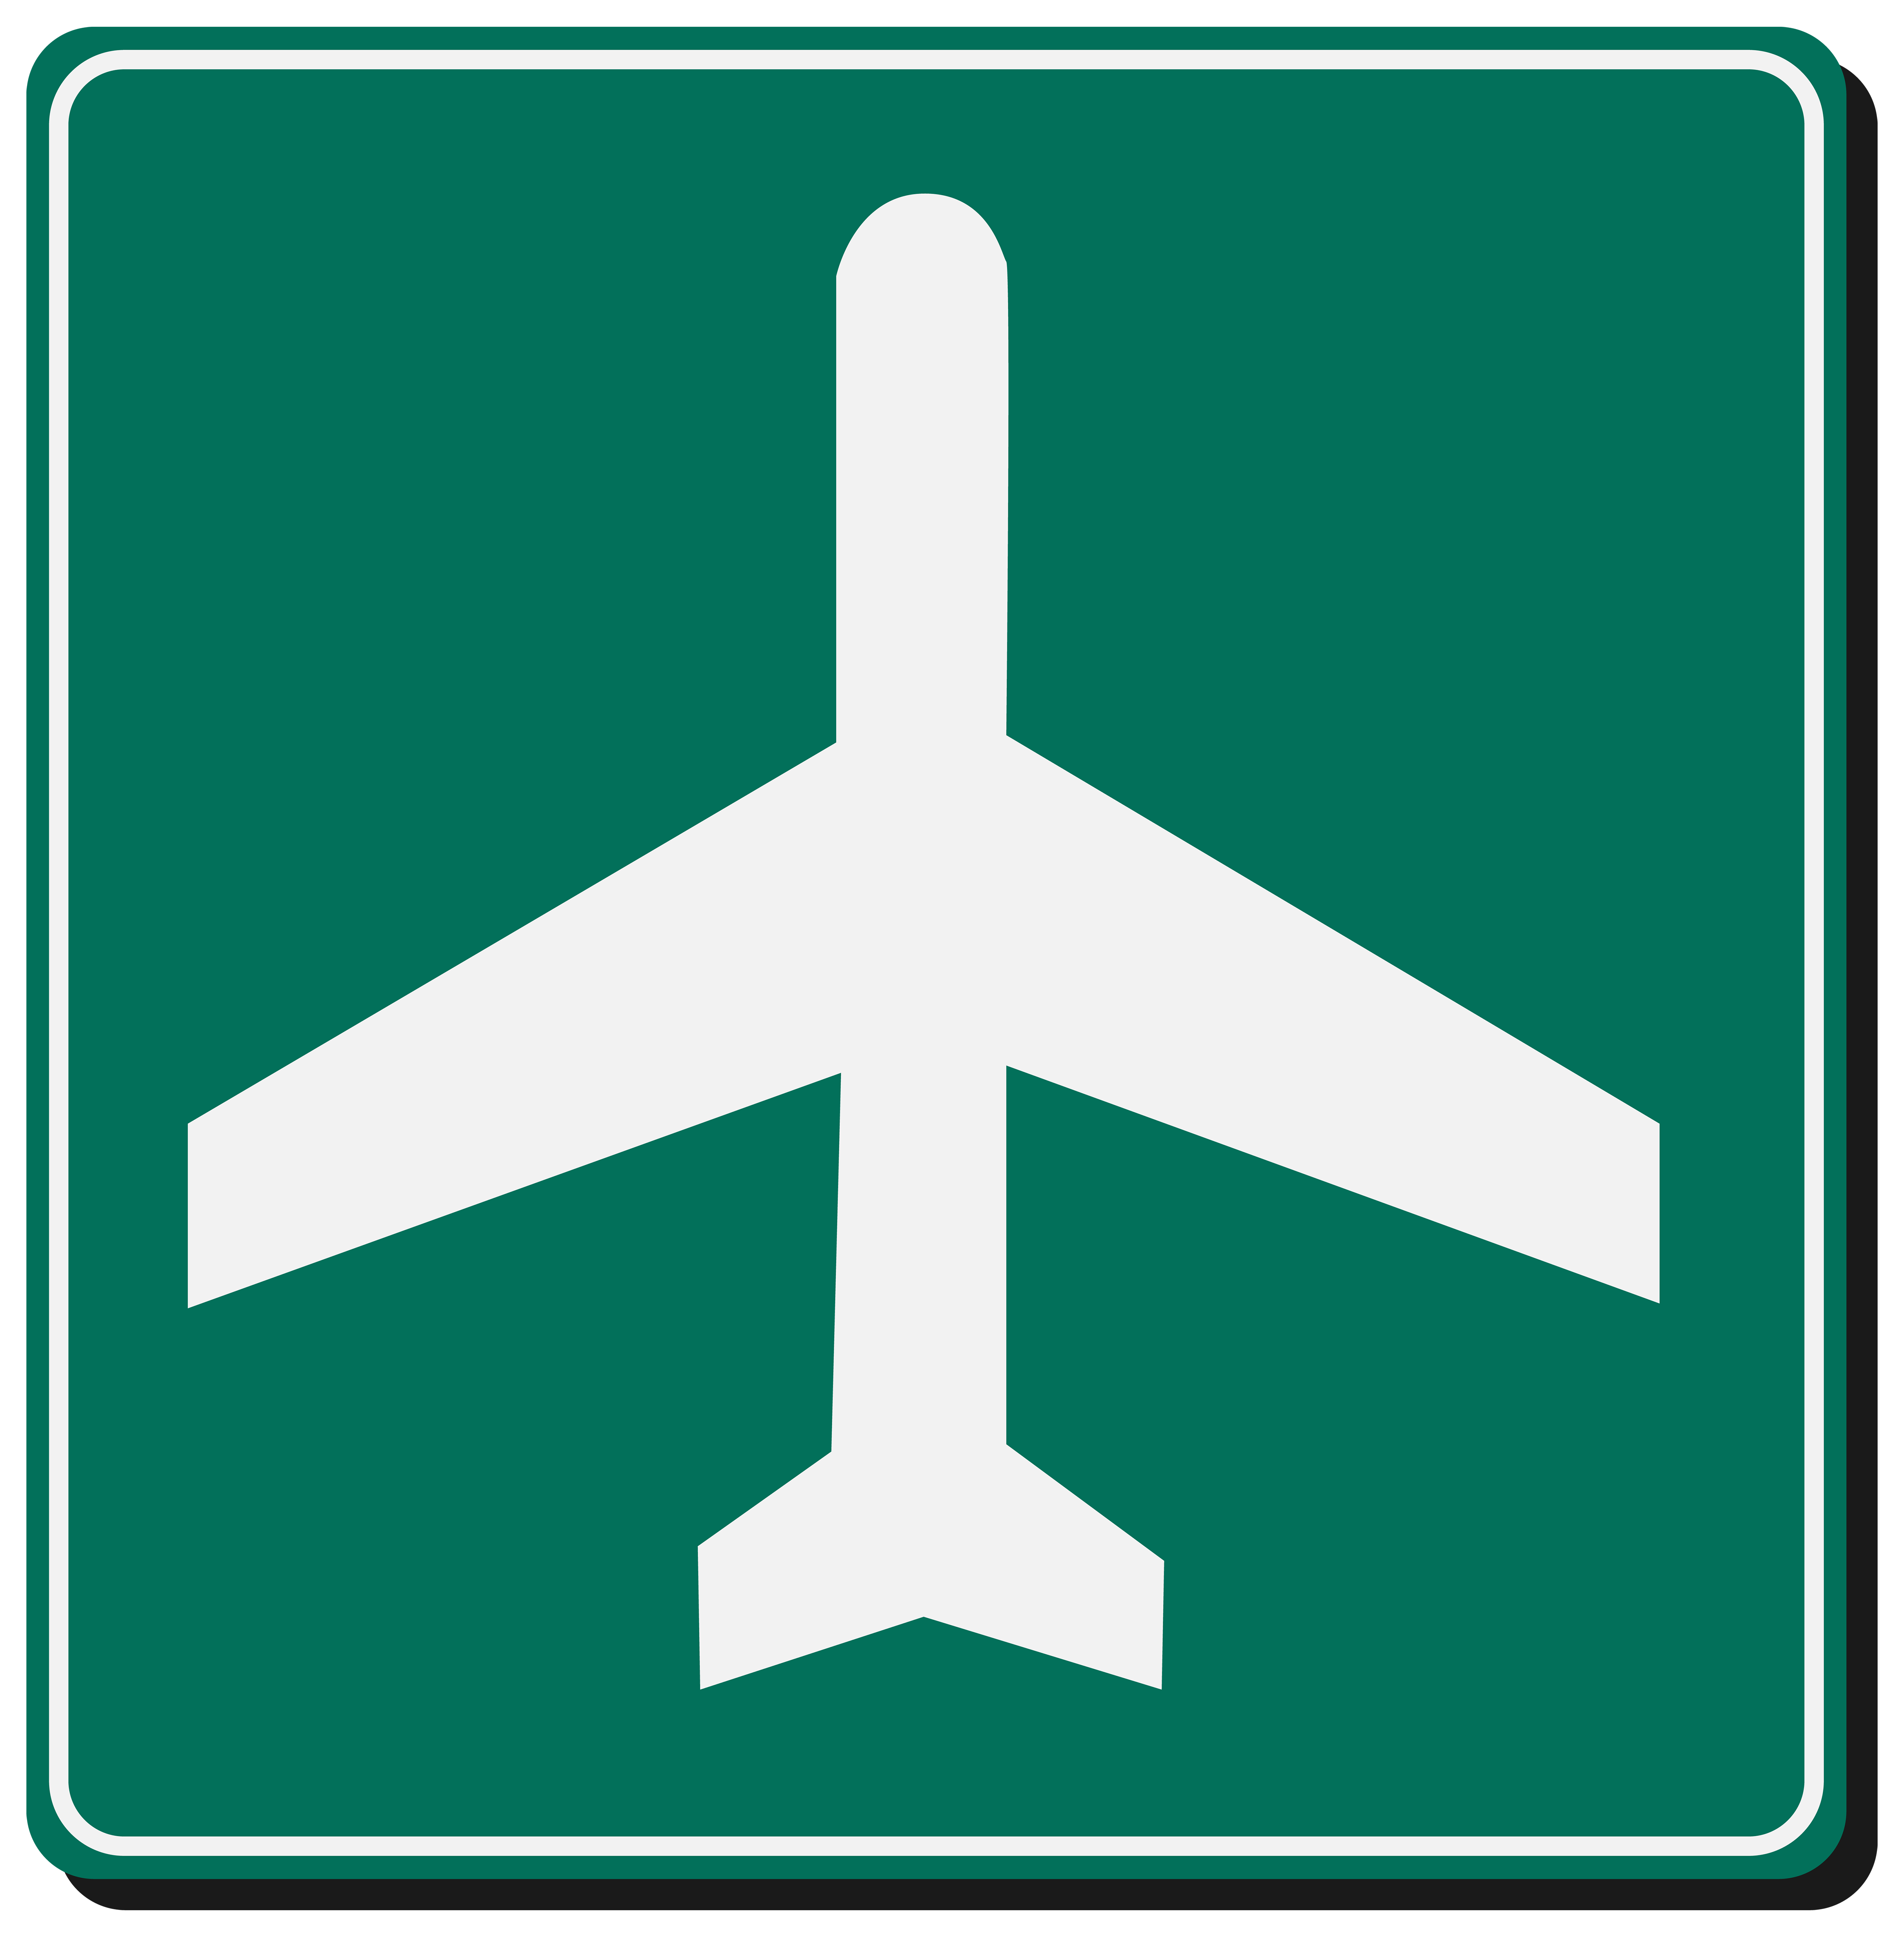 airport signs clipart - photo #12